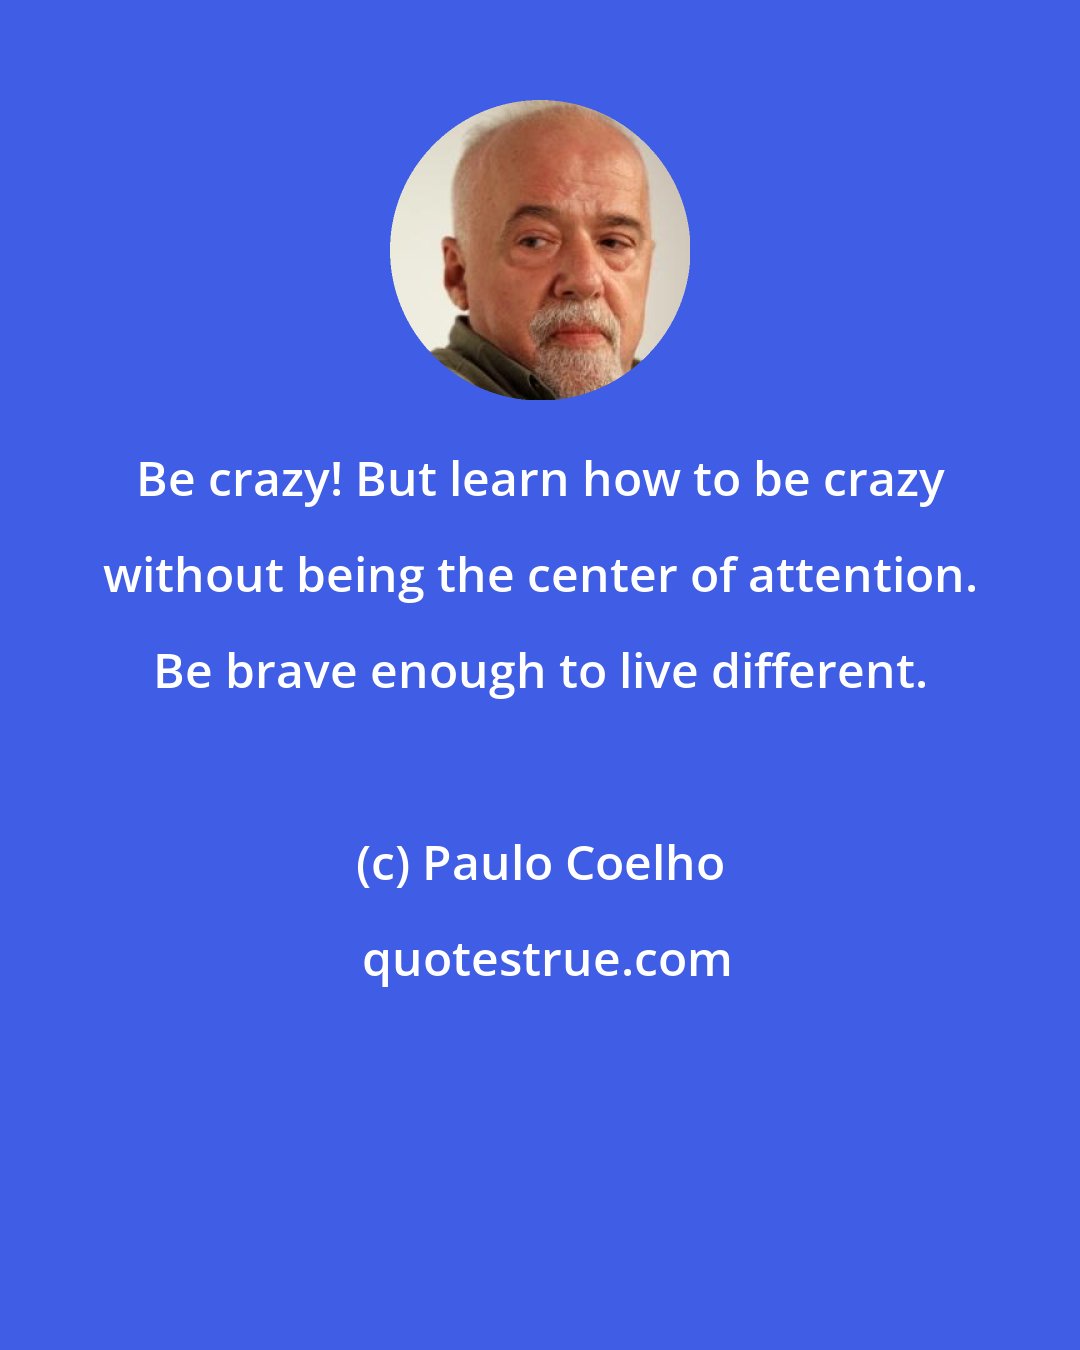 Paulo Coelho: Be crazy! But learn how to be crazy without being the center of attention. Be brave enough to live different.